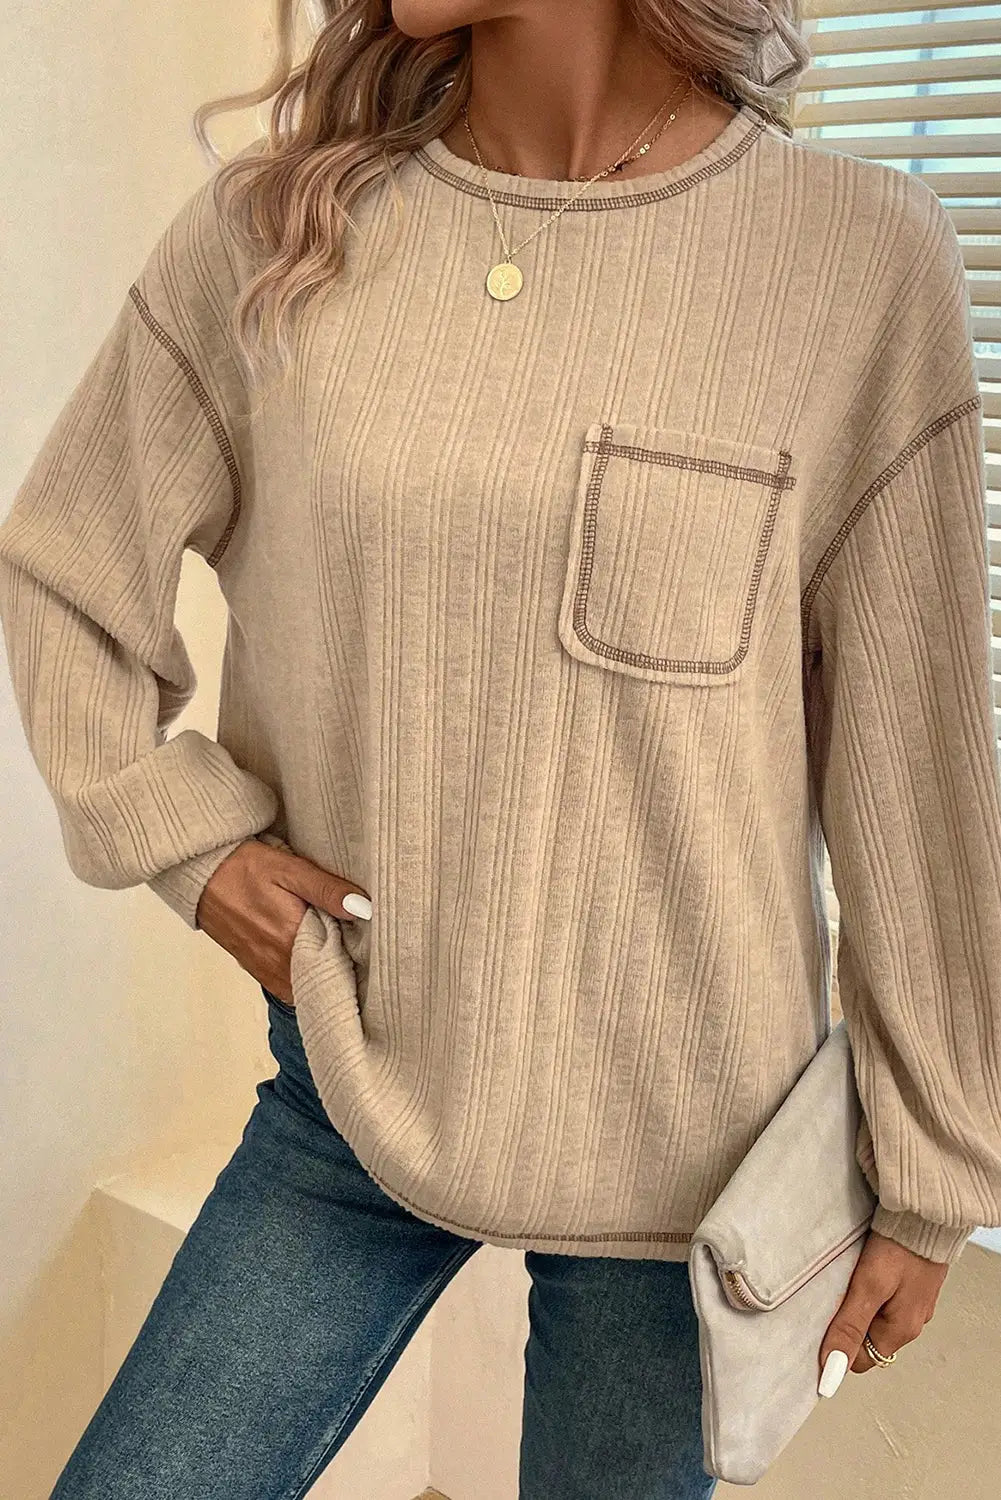 Pale khaki loose exposed stitching textured knit top - long sleeve tops